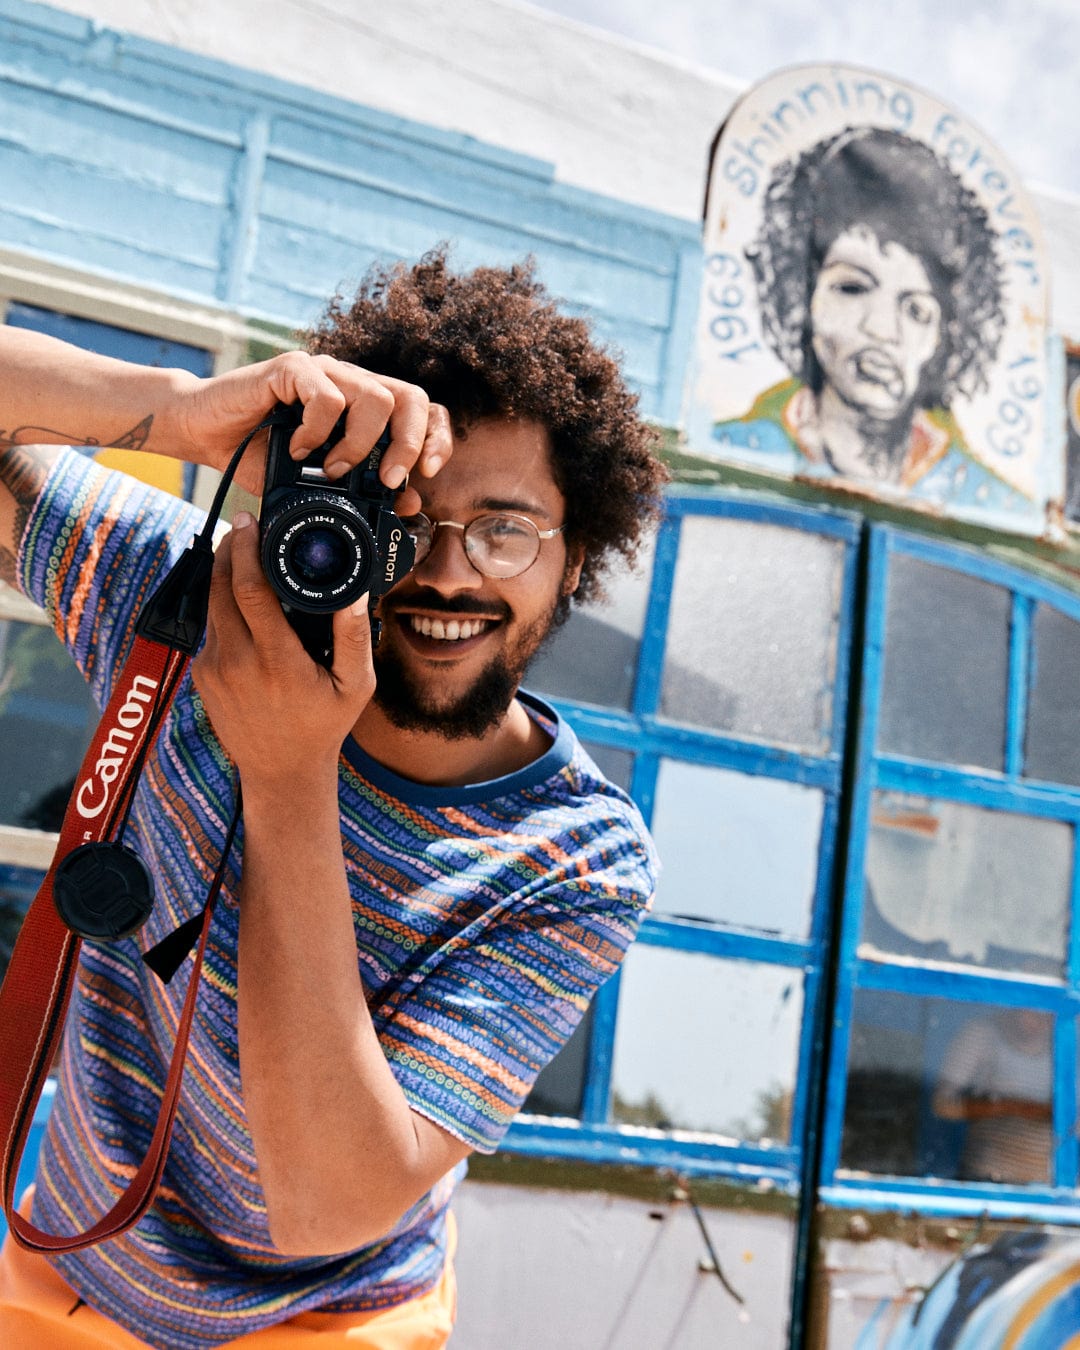 A smiling man with curly hair taking a photo with a Canon camera, standing in front of a colorful Aztec print mural of a face wearing a Saltrock Marks - Mens Short Sleeve T-Shirt in Purple.